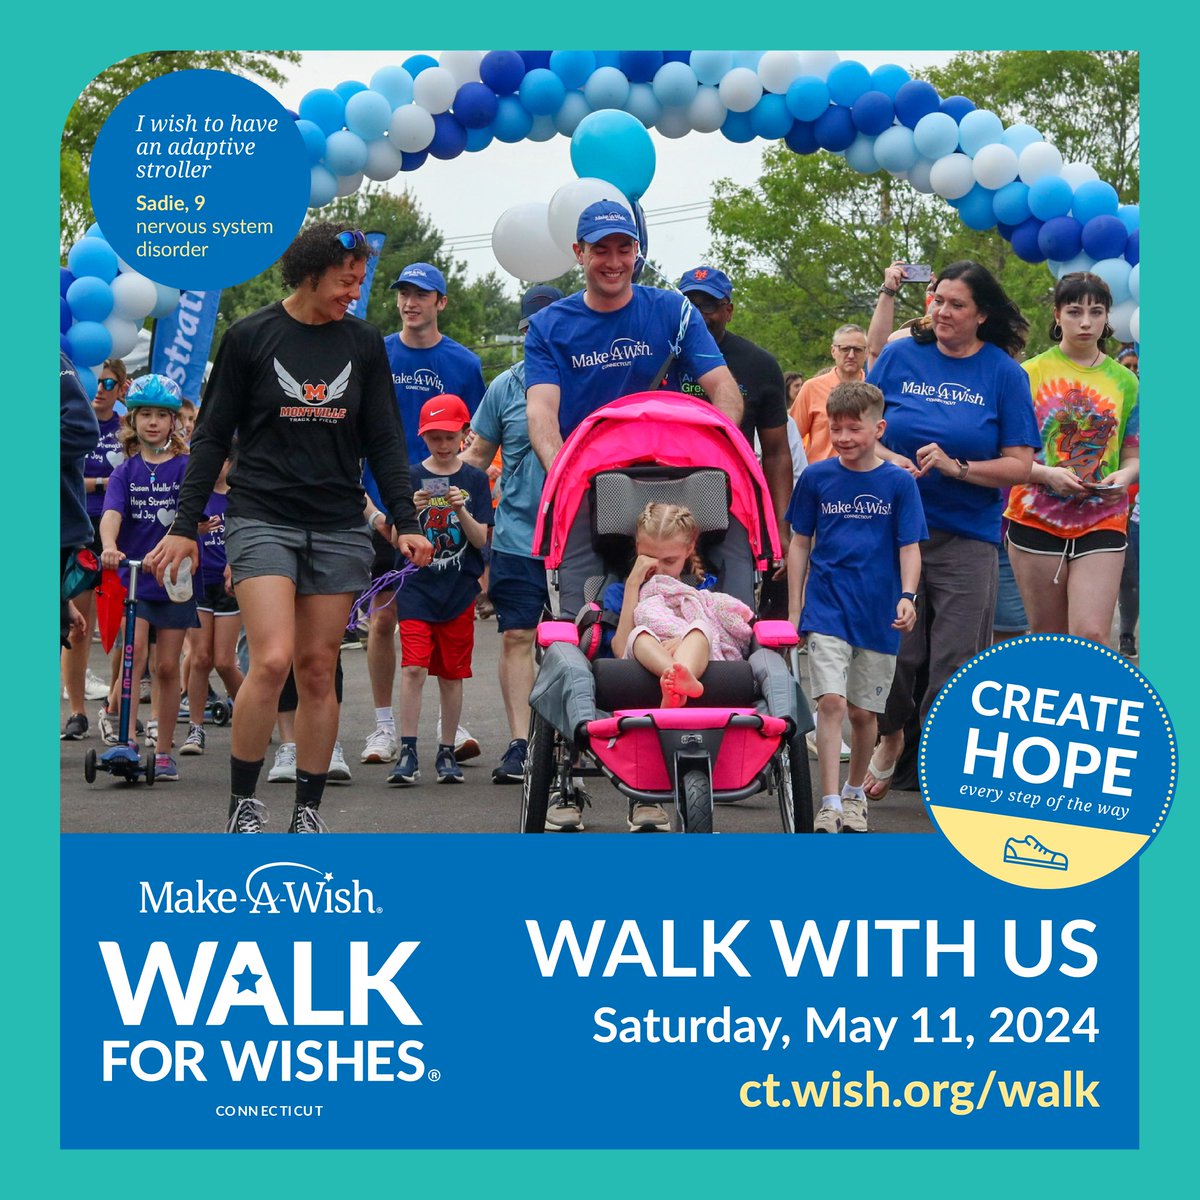 Thank you to @littlepub for donating two new containers for our sports field & supporting the Walk for Wishes! Join us on 5/11, for our family-friendly fundraiser! Register your team at ct.wish.org/walk TODAY with the promo code 'WORLDWISHDAY' for FREE registration 🤩⭐️